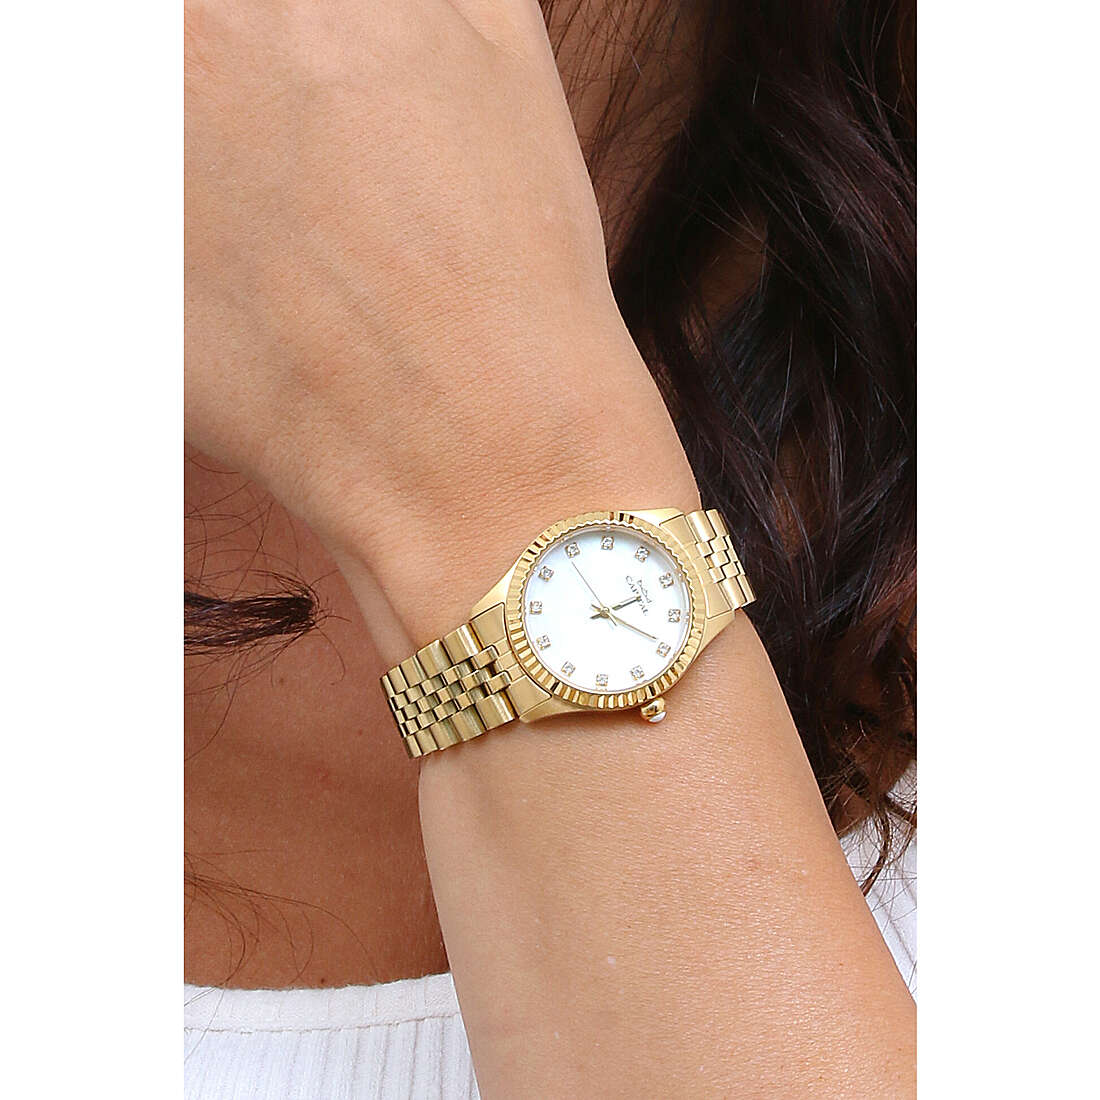 Capital only time Paris woman AX197-01 wearing